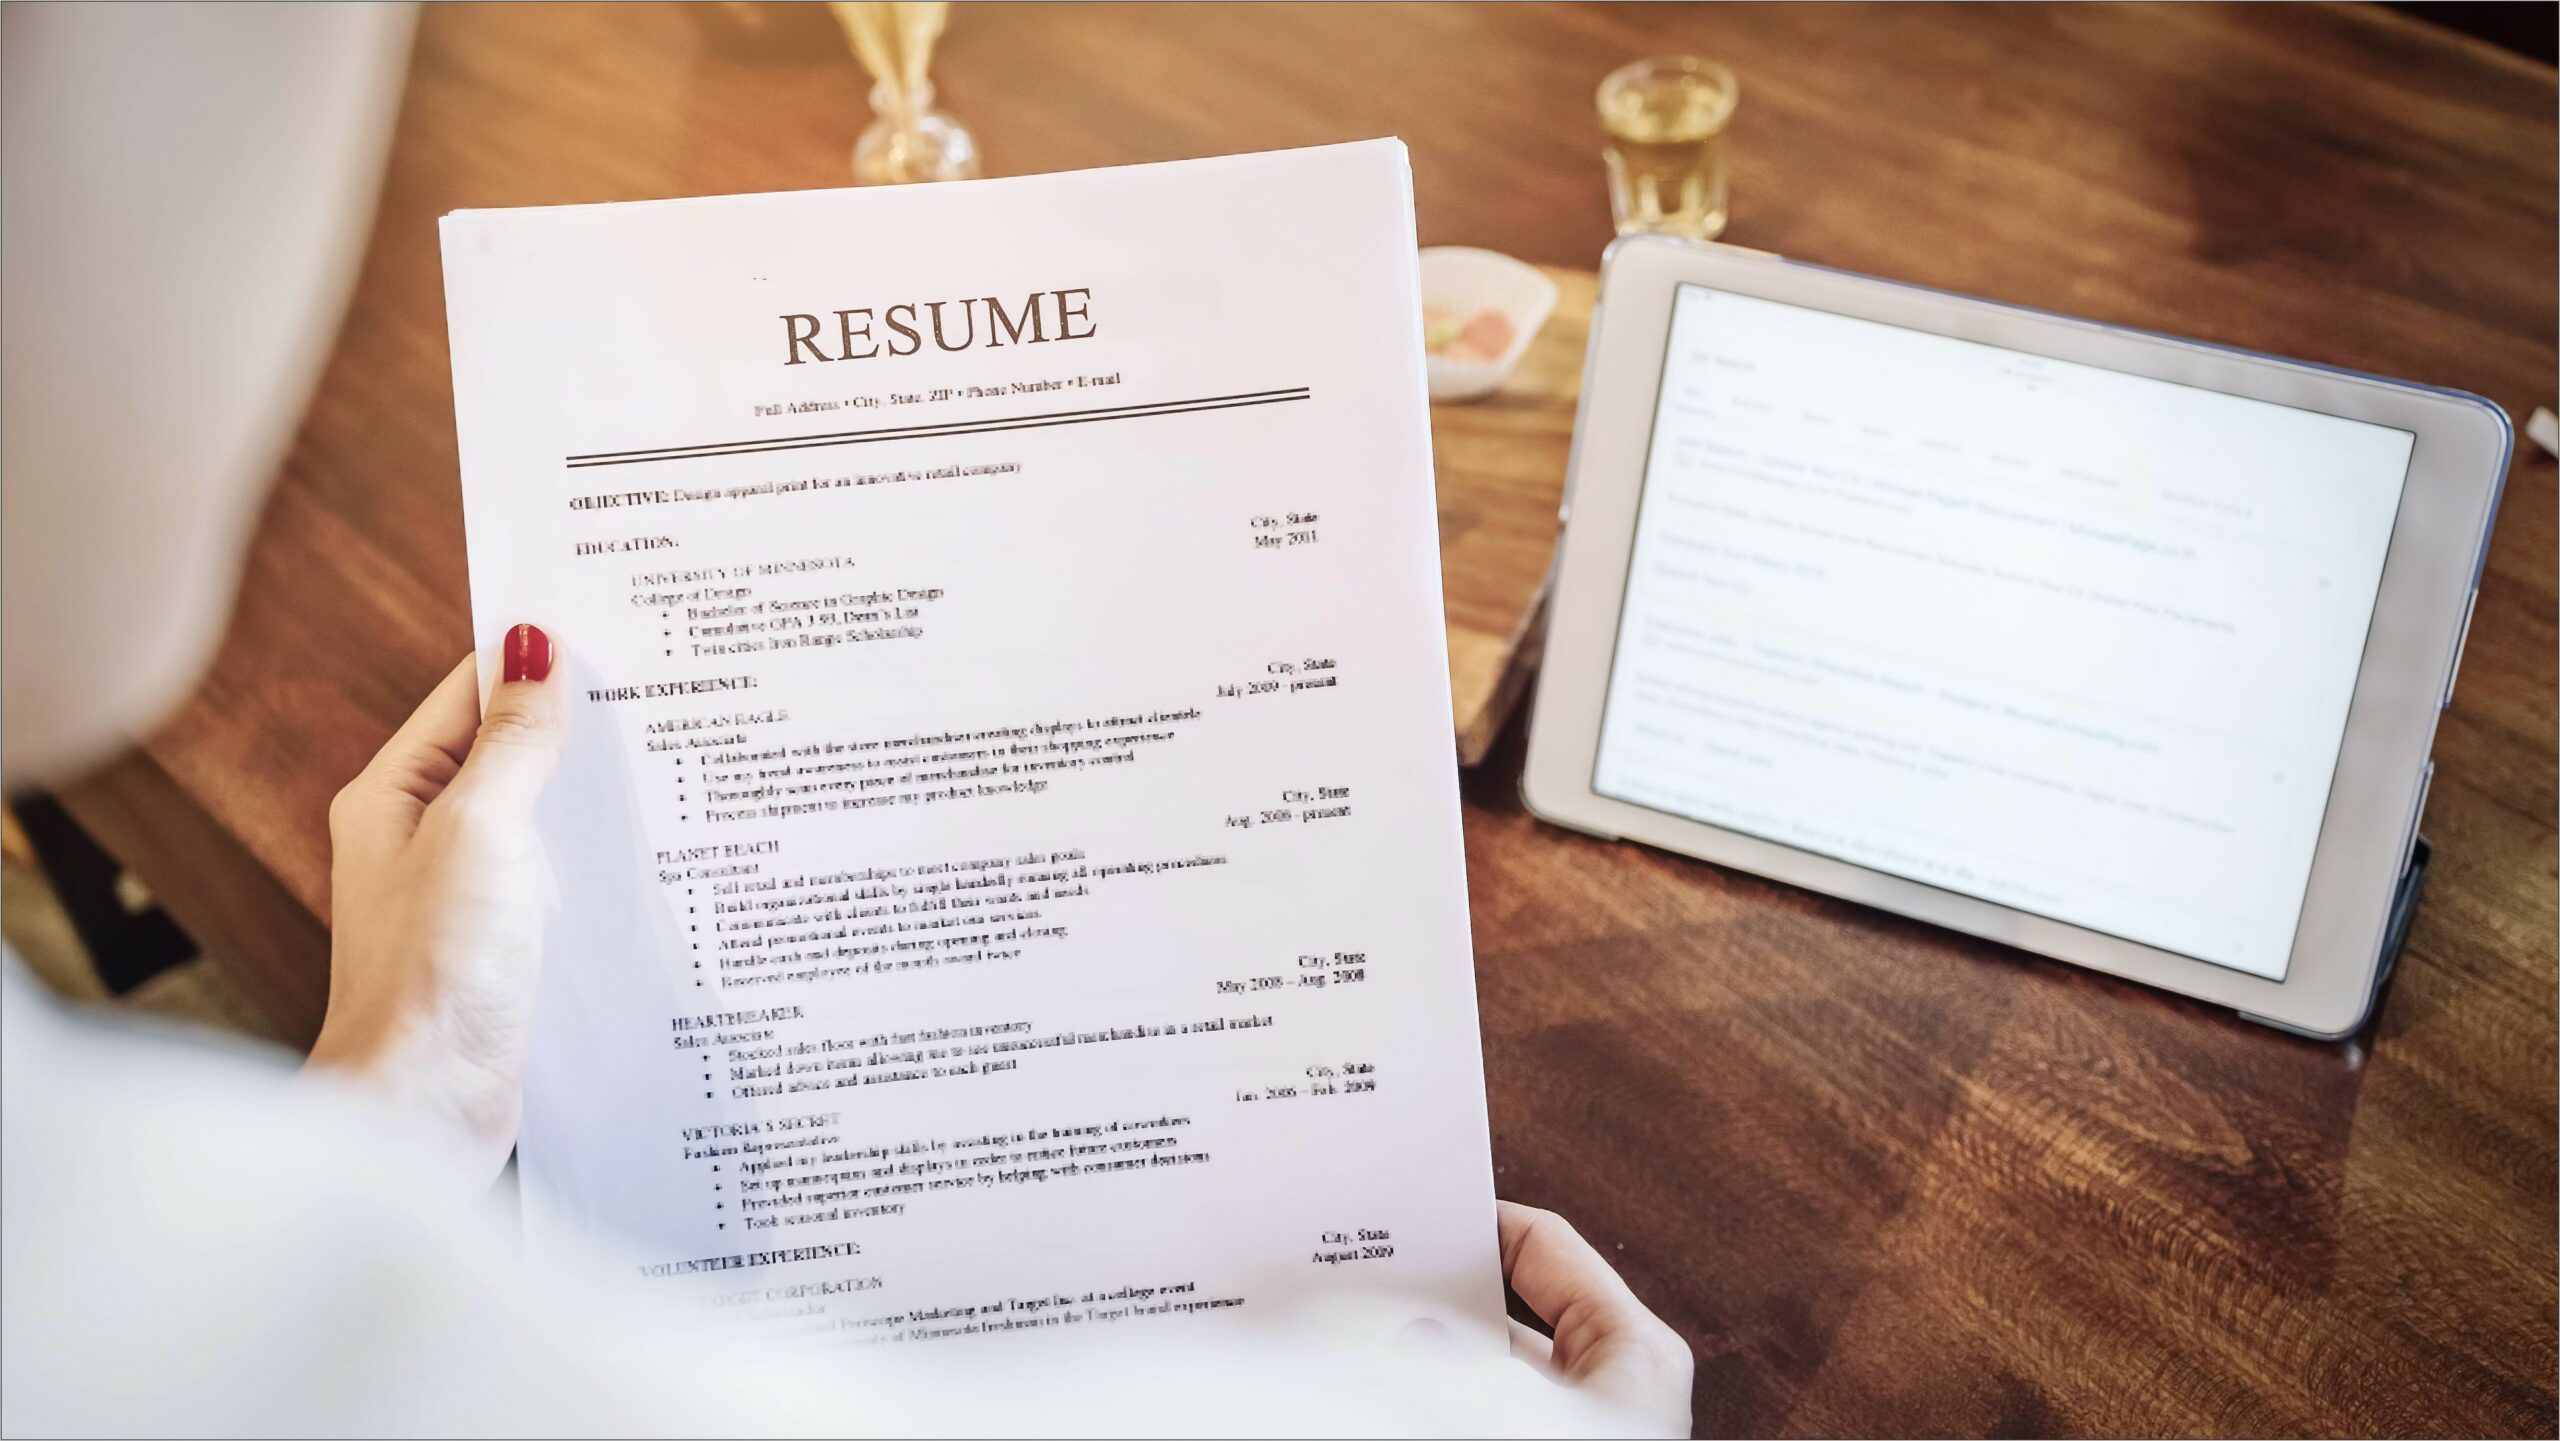 Additional Skills To Write On A Resume